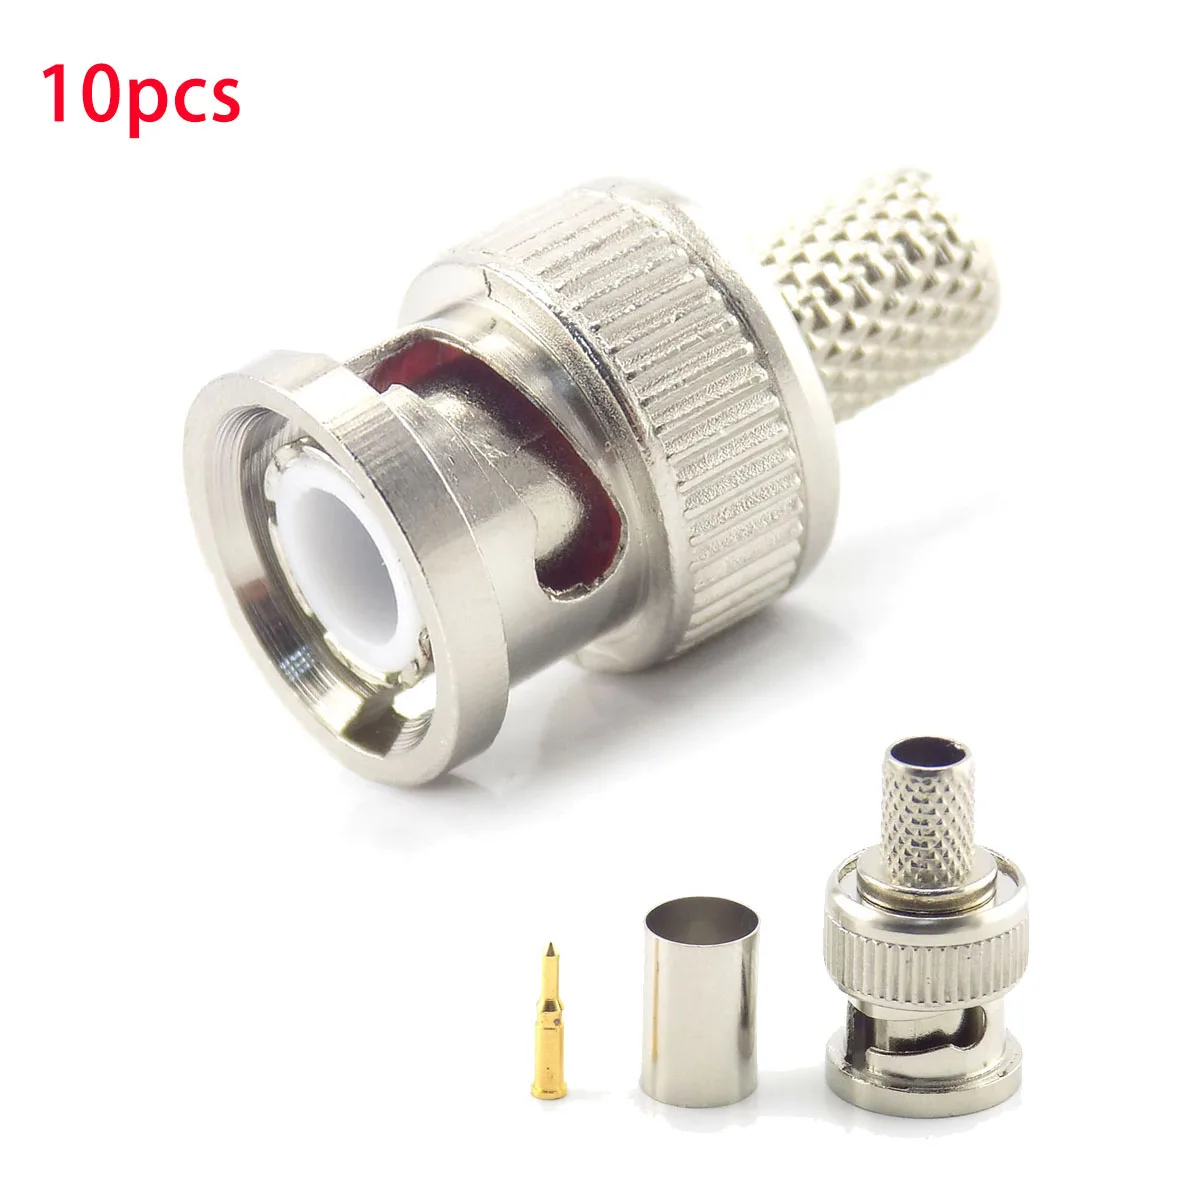 

10Pcs 3 In 1Coupler Crimp Connector Bnc Male Connector To Coax Rg59 Connector Cable for Cctv Camera Accessories